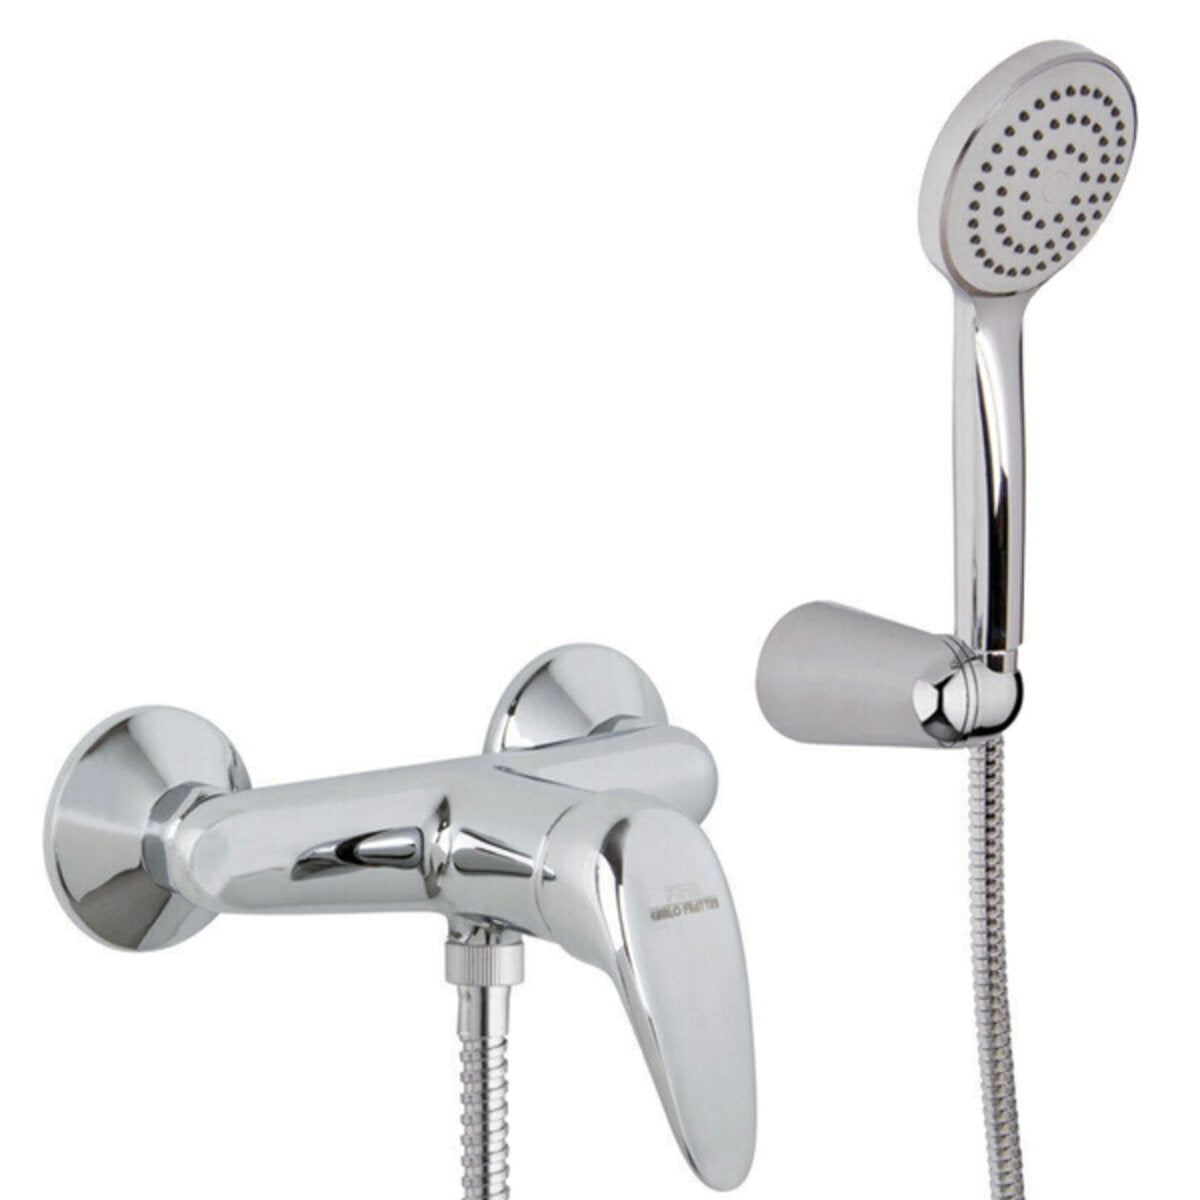 Fima Carlo Frattini series 18 external shower mixer without diverter with shower set